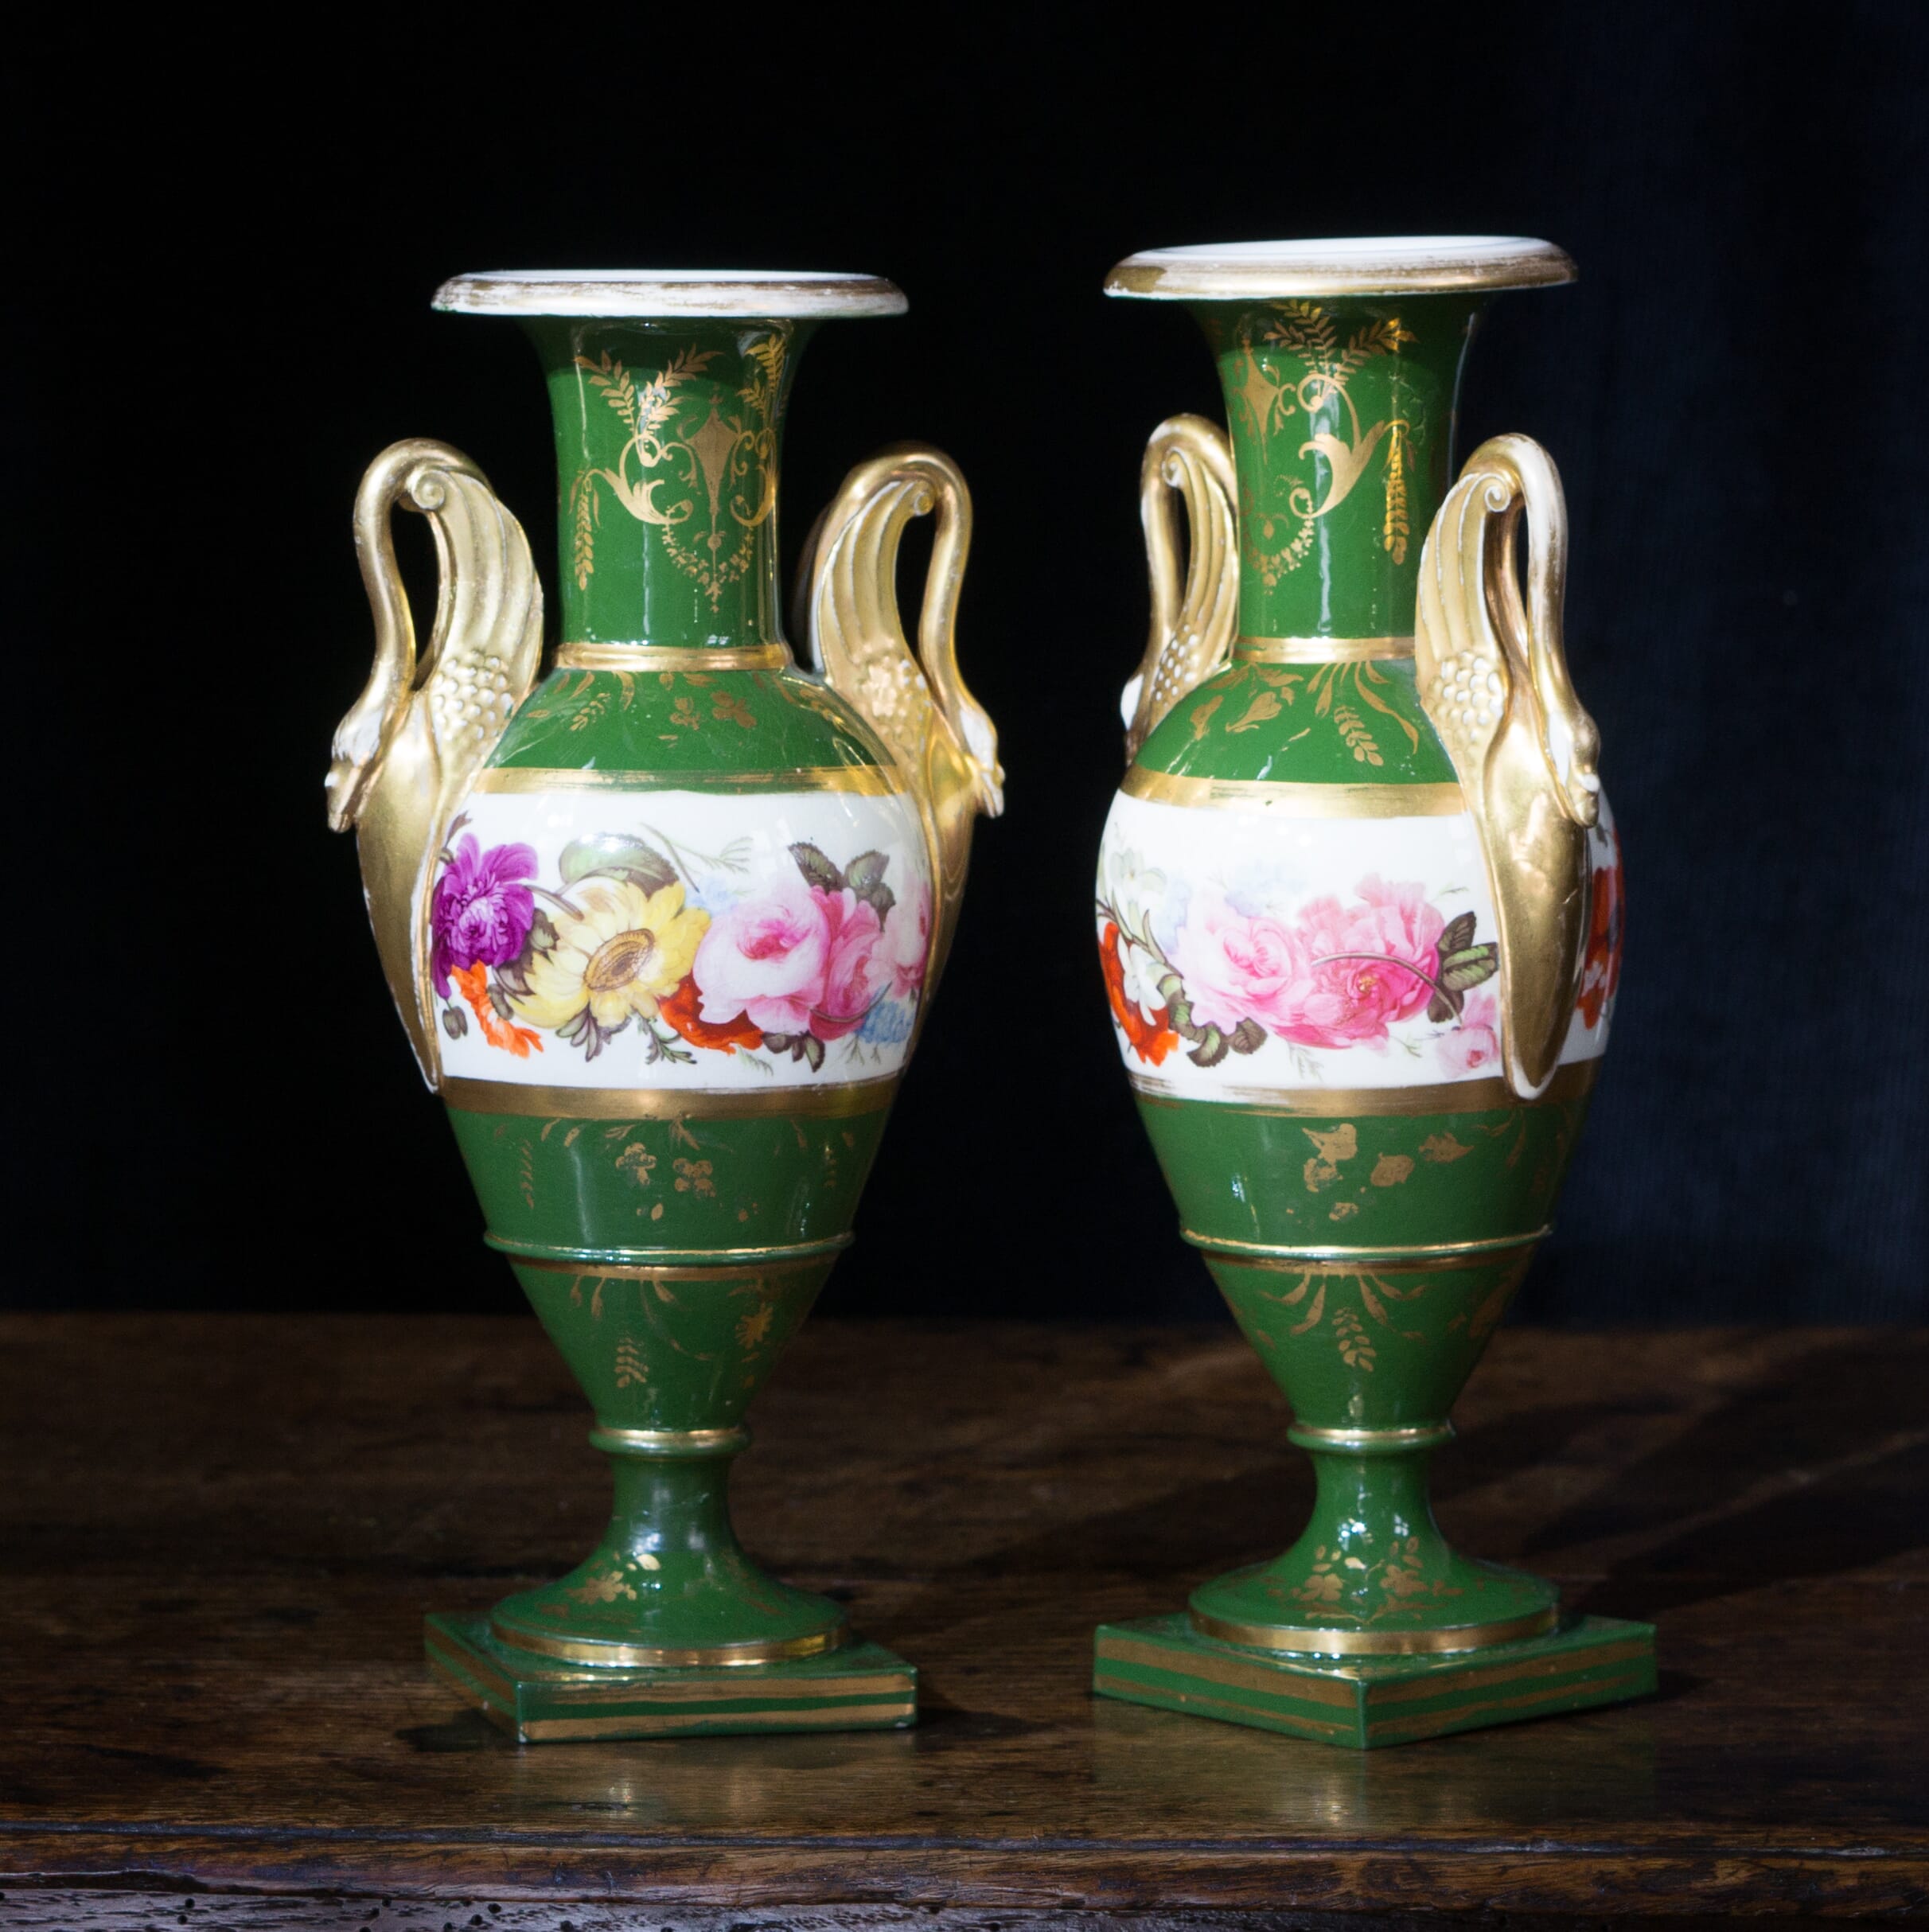 Pair of rare Charles Bourne vases with swan handles, flowers, c. 1830-0